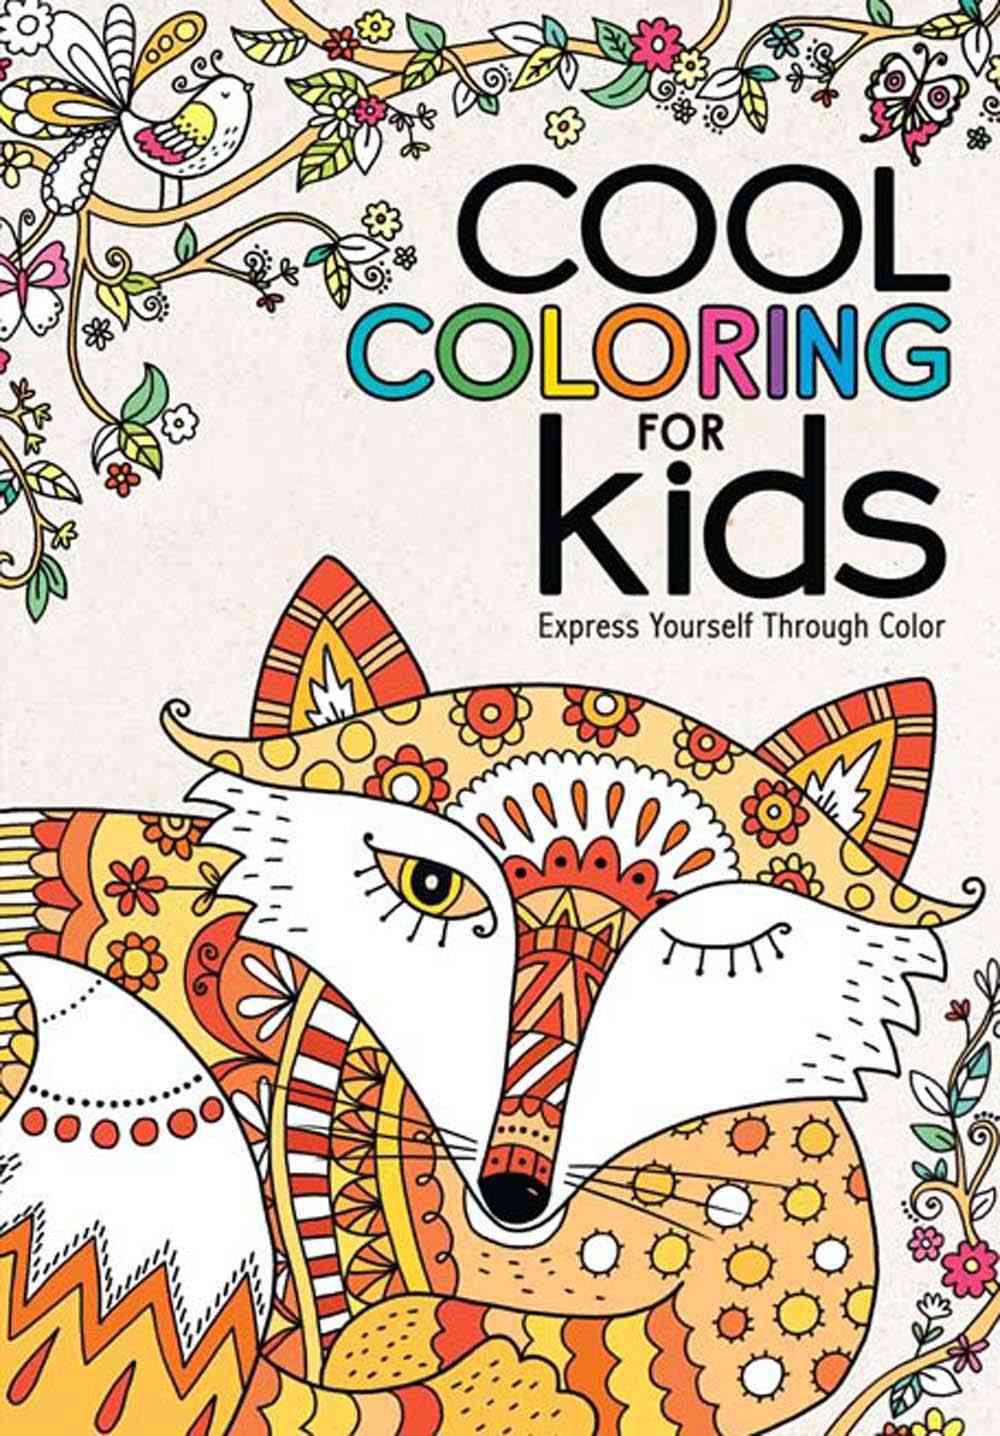 Download Cool Coloring for Kids: Express Yourself Through Color by Michael O'Mara Books, Paperback ...